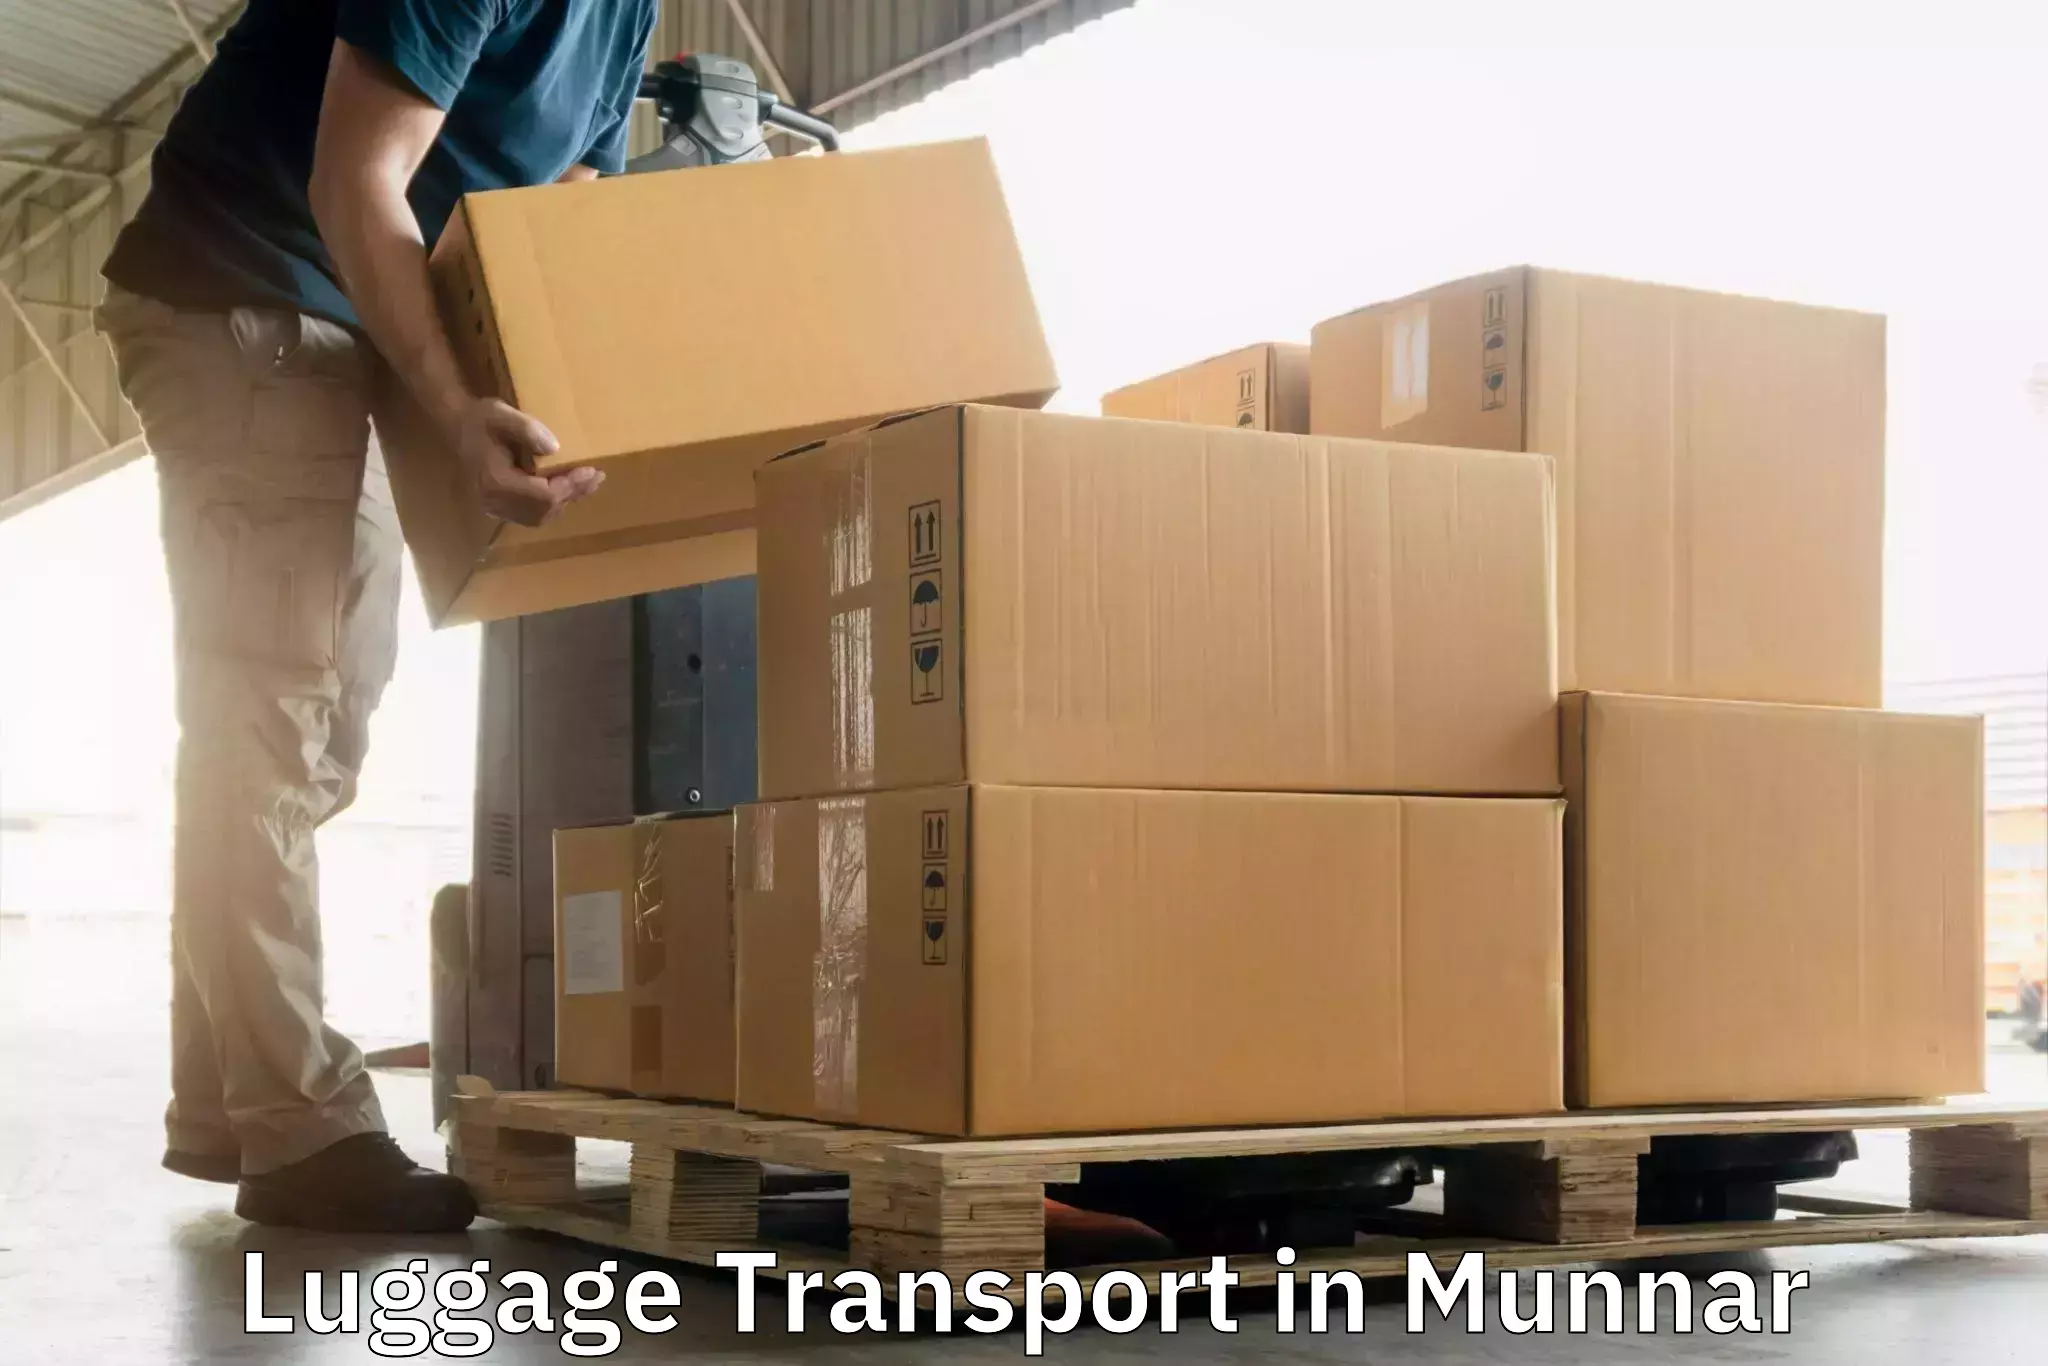 Baggage shipping experience in Munnar